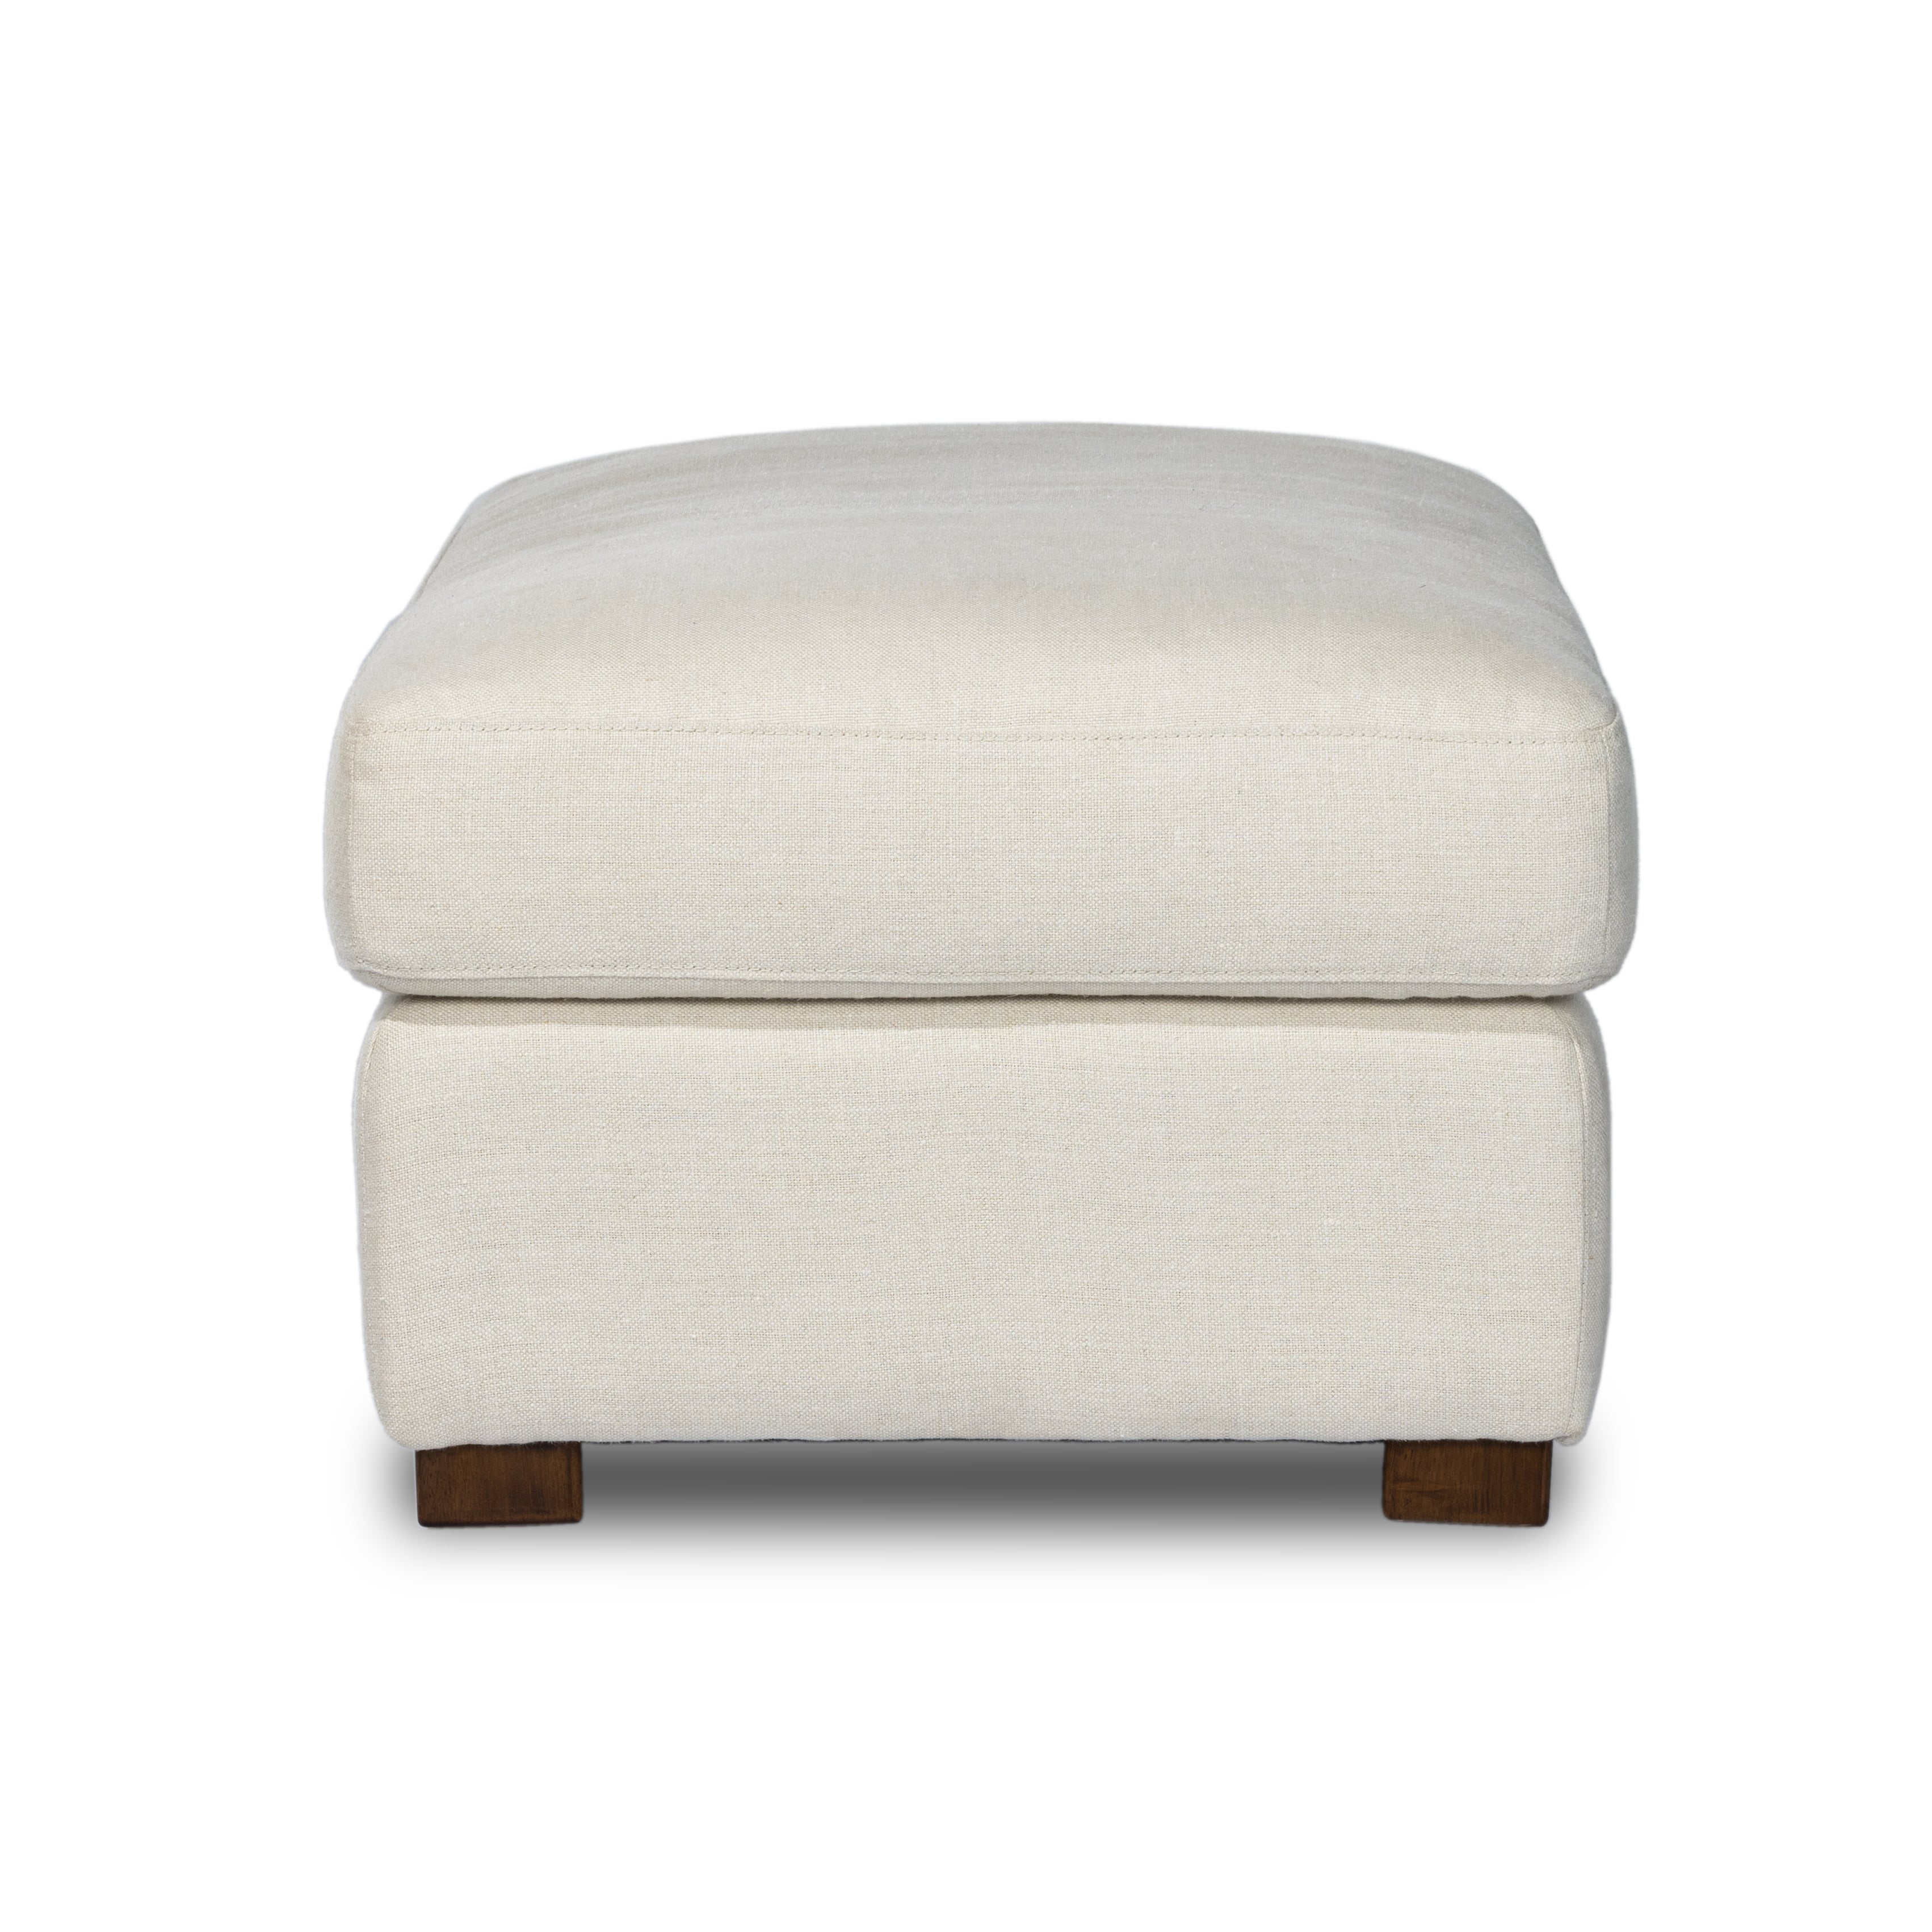 Traditional styling gets a modern spin. Feather-blend cushioning accents simple parawood feet. This lounge-worthy ottoman features sustainably made Belgian Linenâ„¢. Naturally durable and soft to the touch, Libecoâ„¢-sourced linens are artisan-made without toxic chemicals. Amethyst Home provides interior design, new construction, custom furniture and area rugs in the Alpharetta metro area